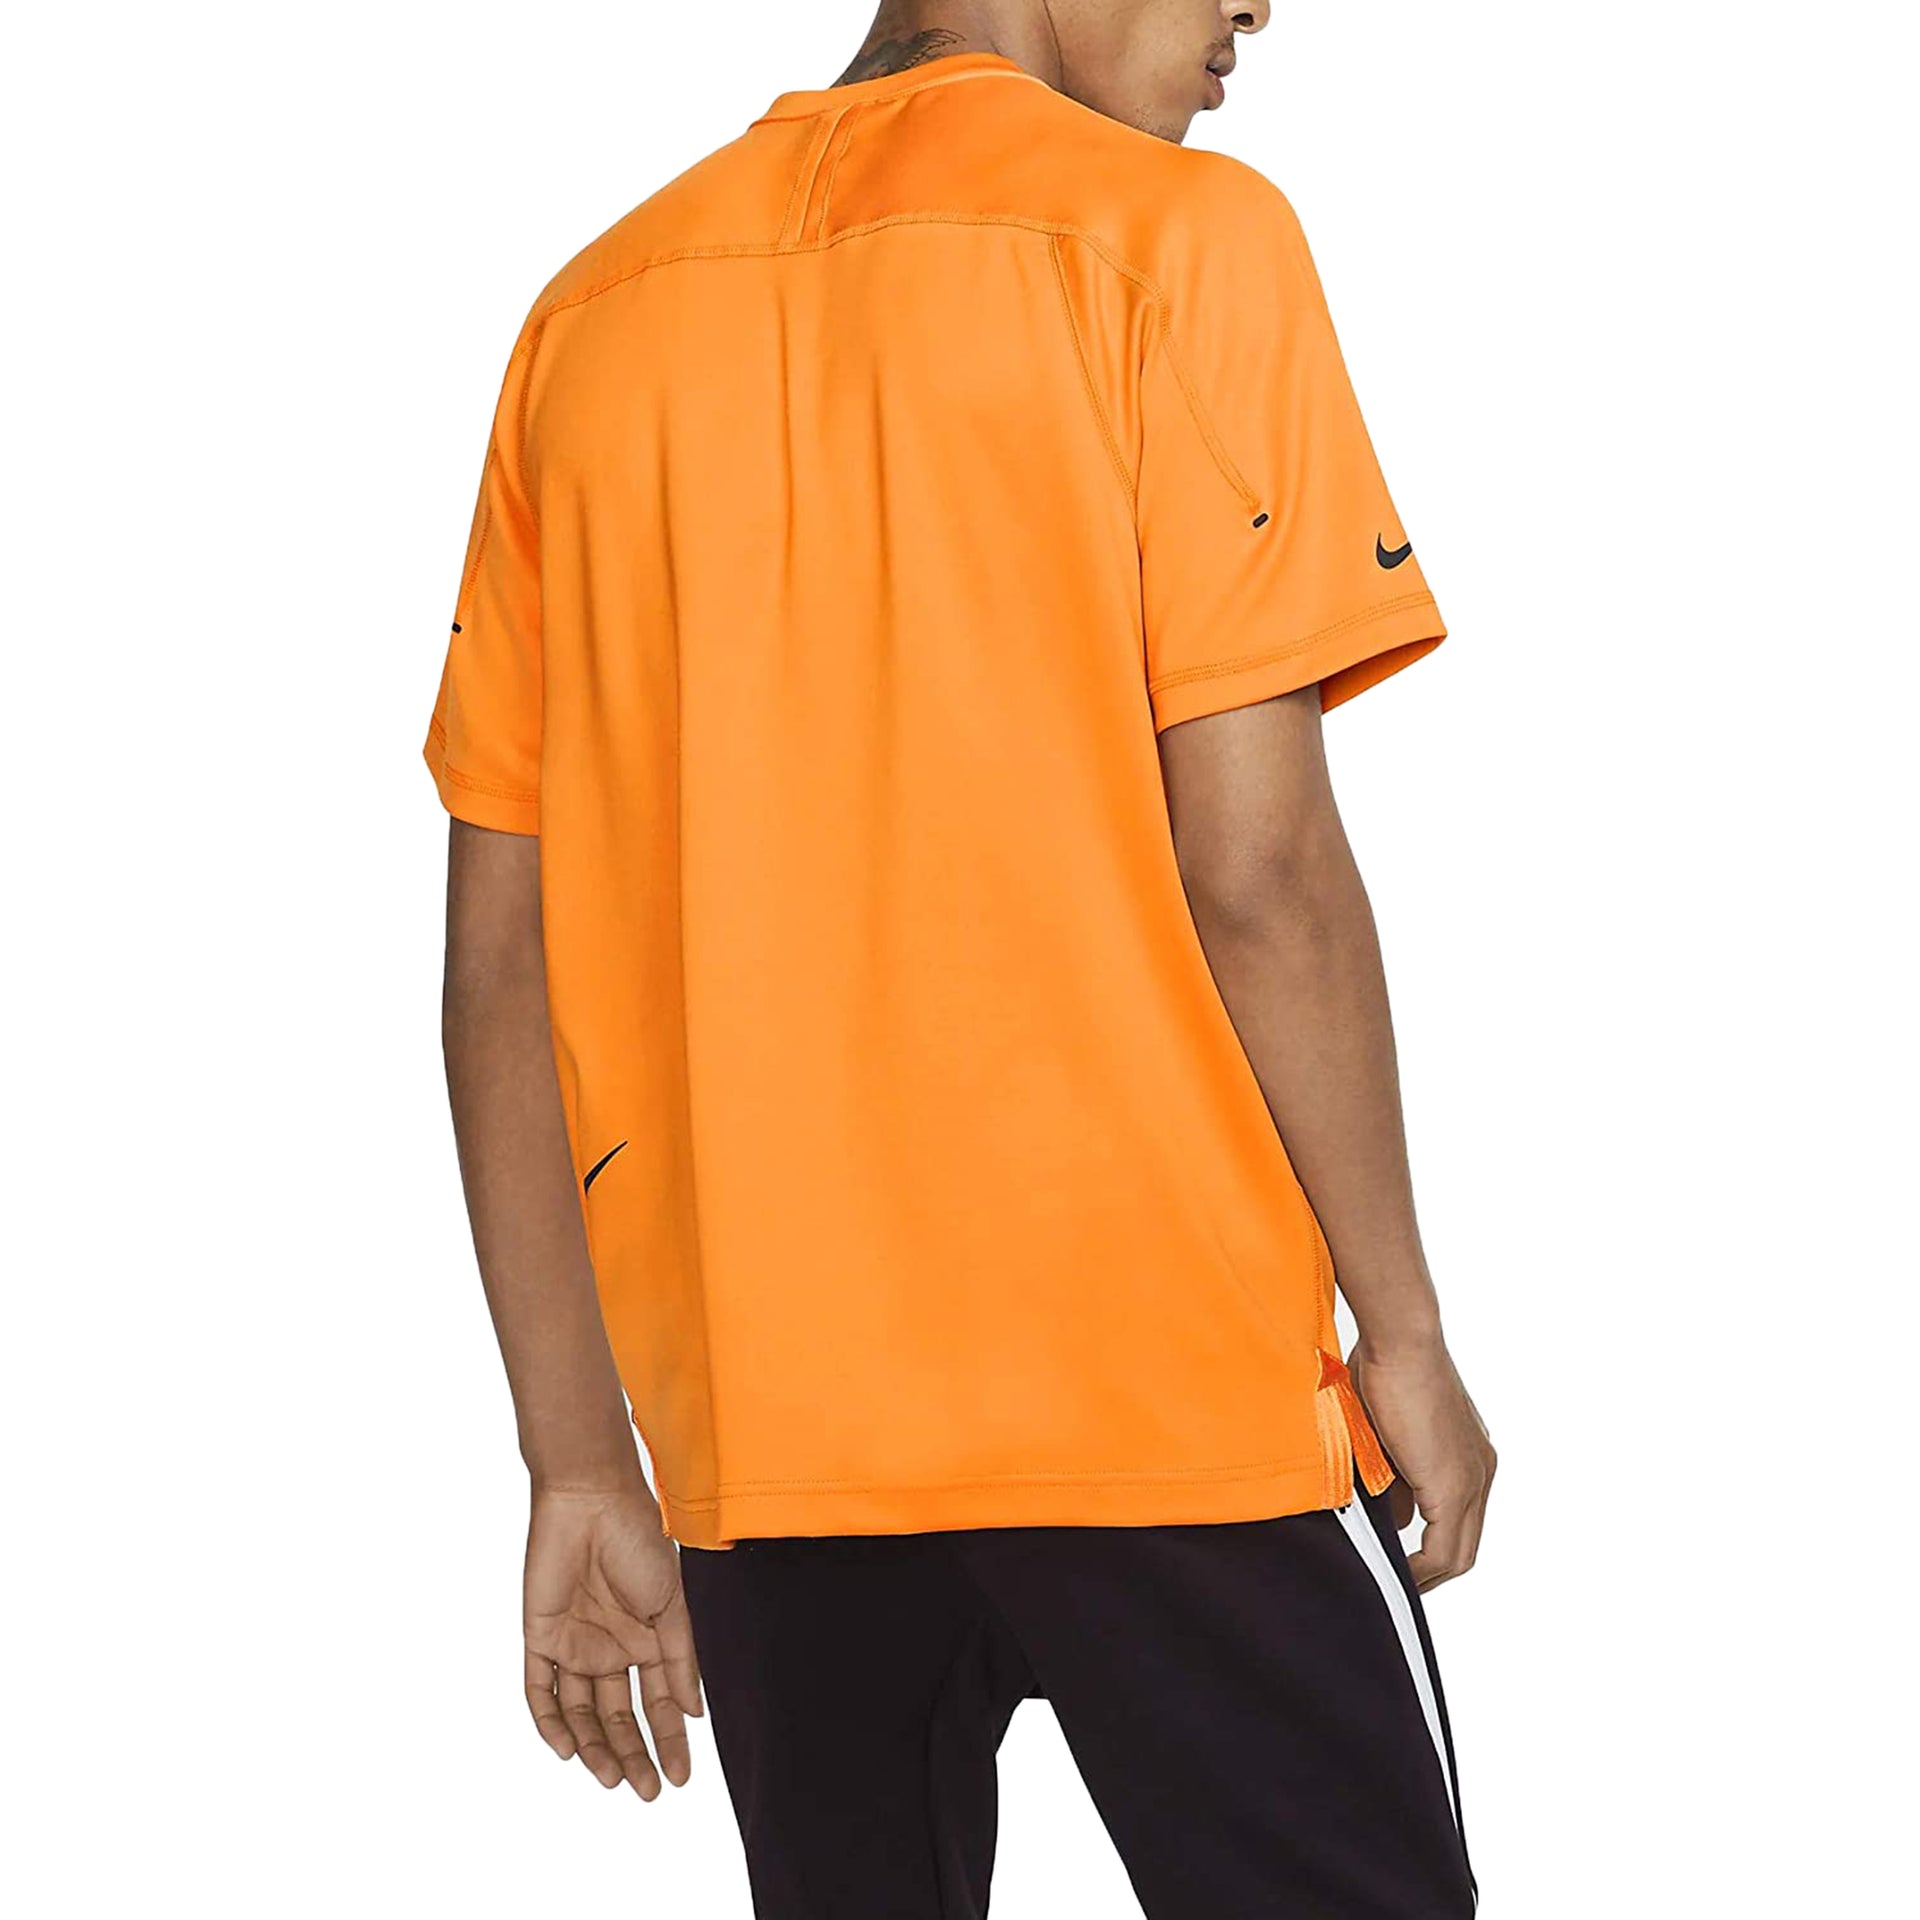 Nike Nsw Tech Pack Top Short Sleeve Shirts Mens Style : Bv4441